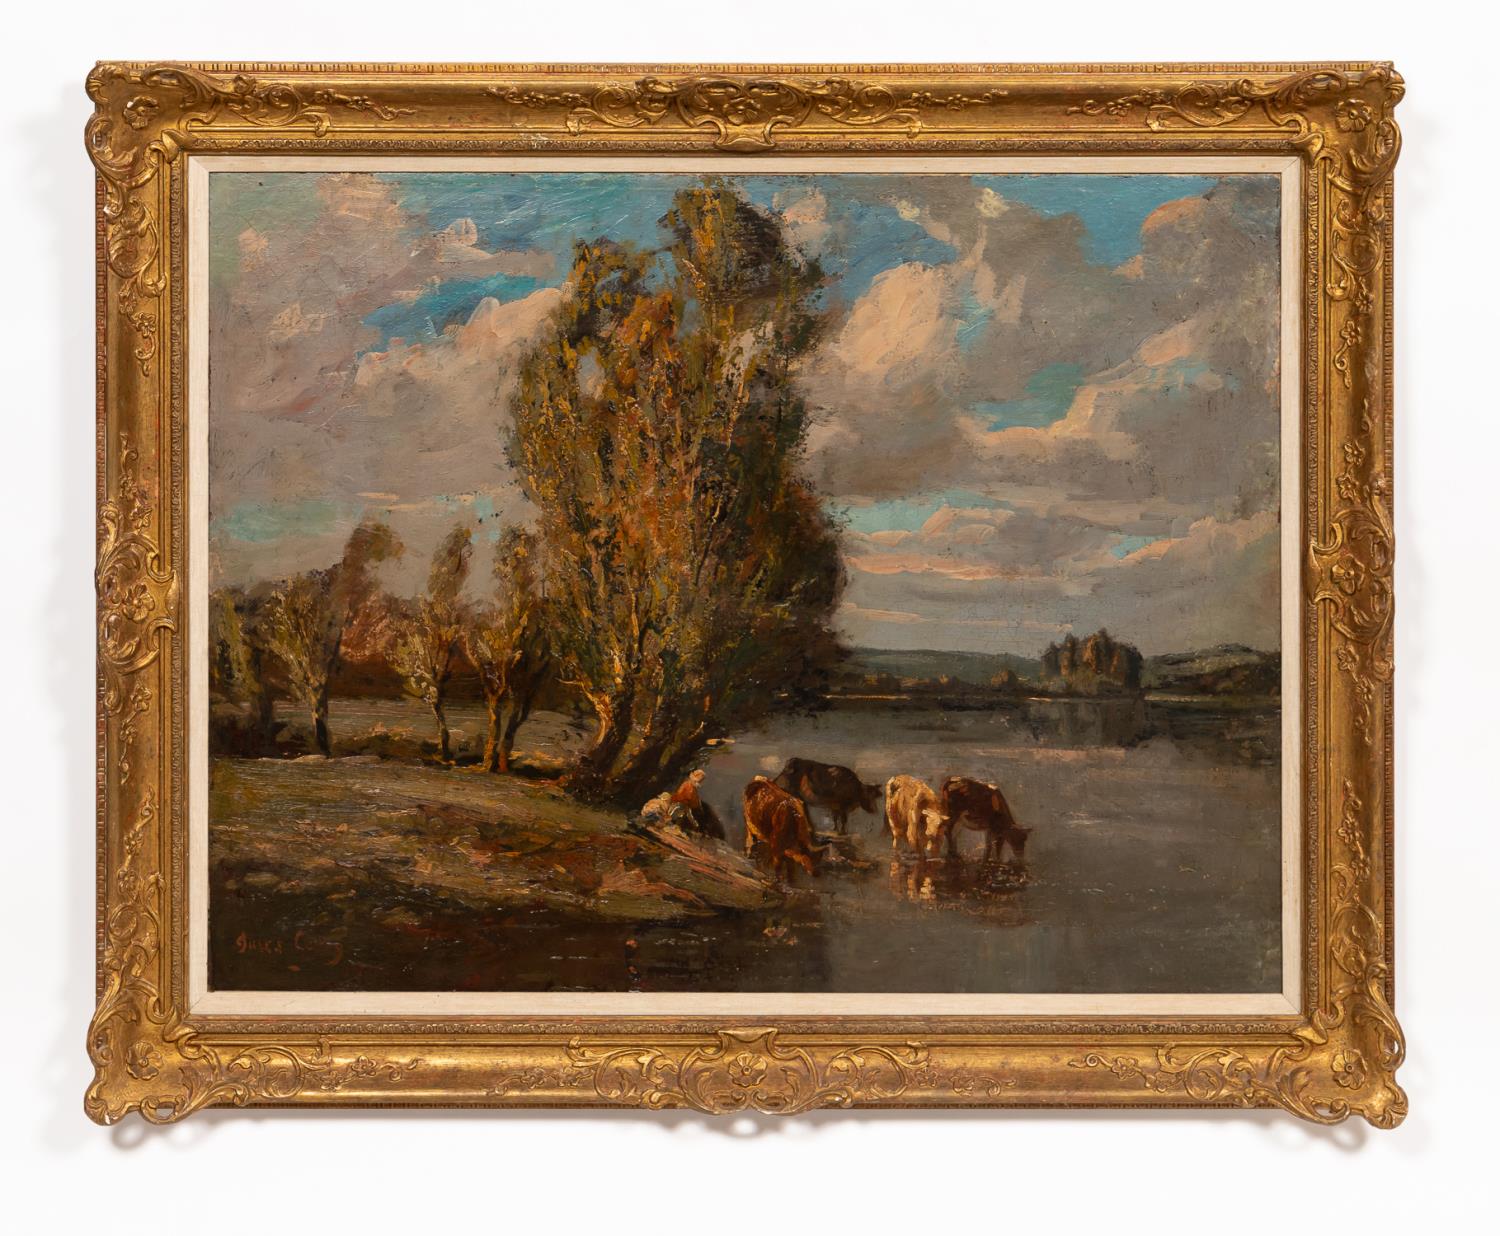 JULES LEROY, LANDSCAPE WITH COWS,